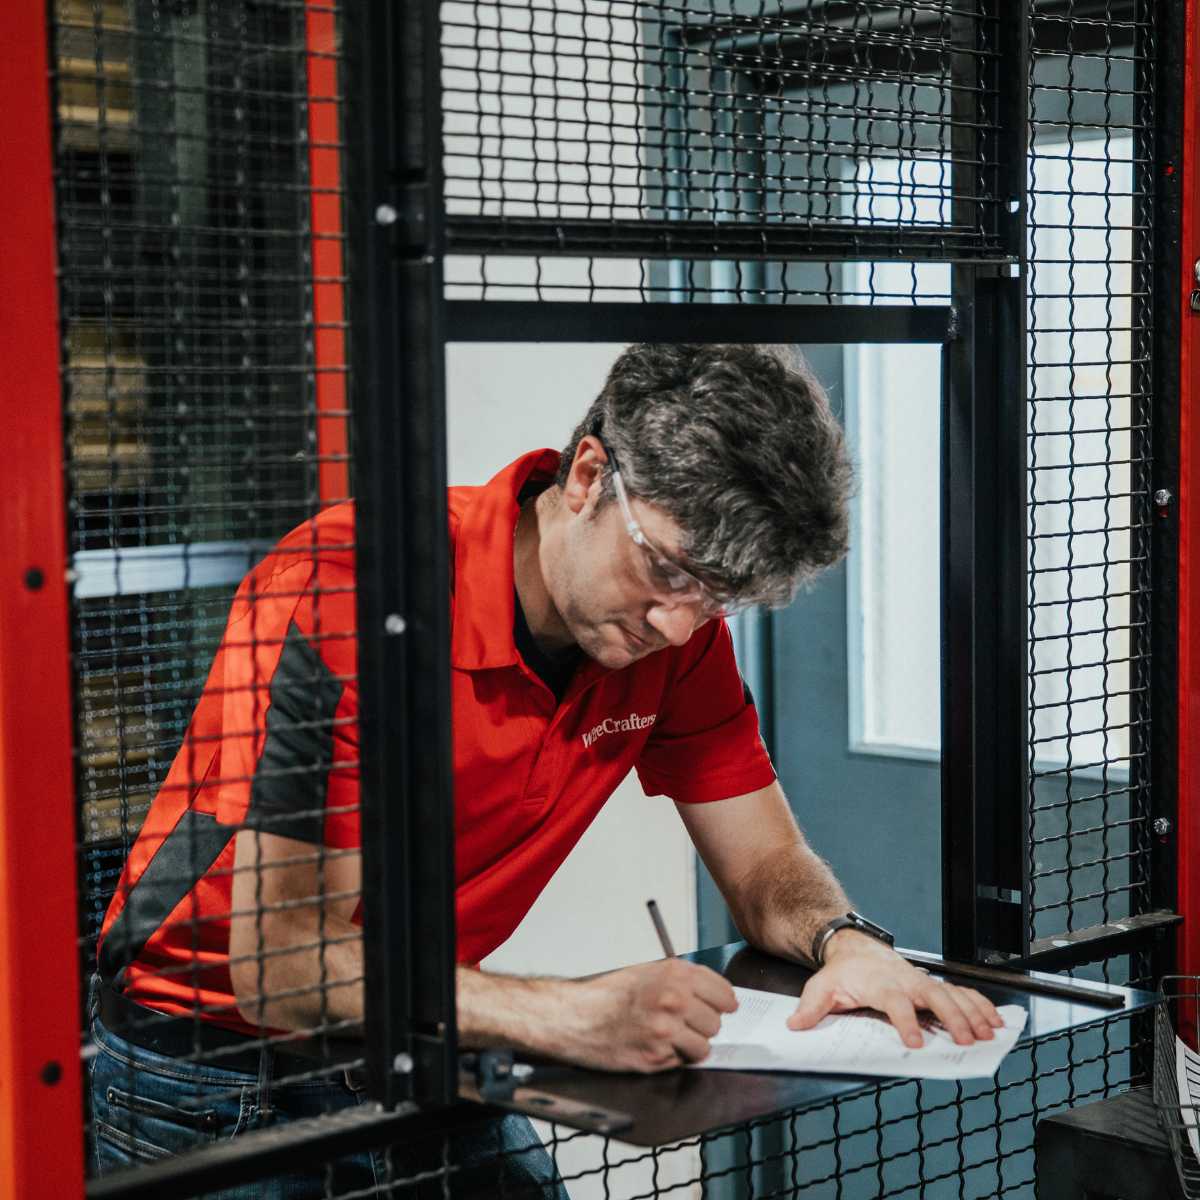 person in red shirt writing on surface in driver cage window